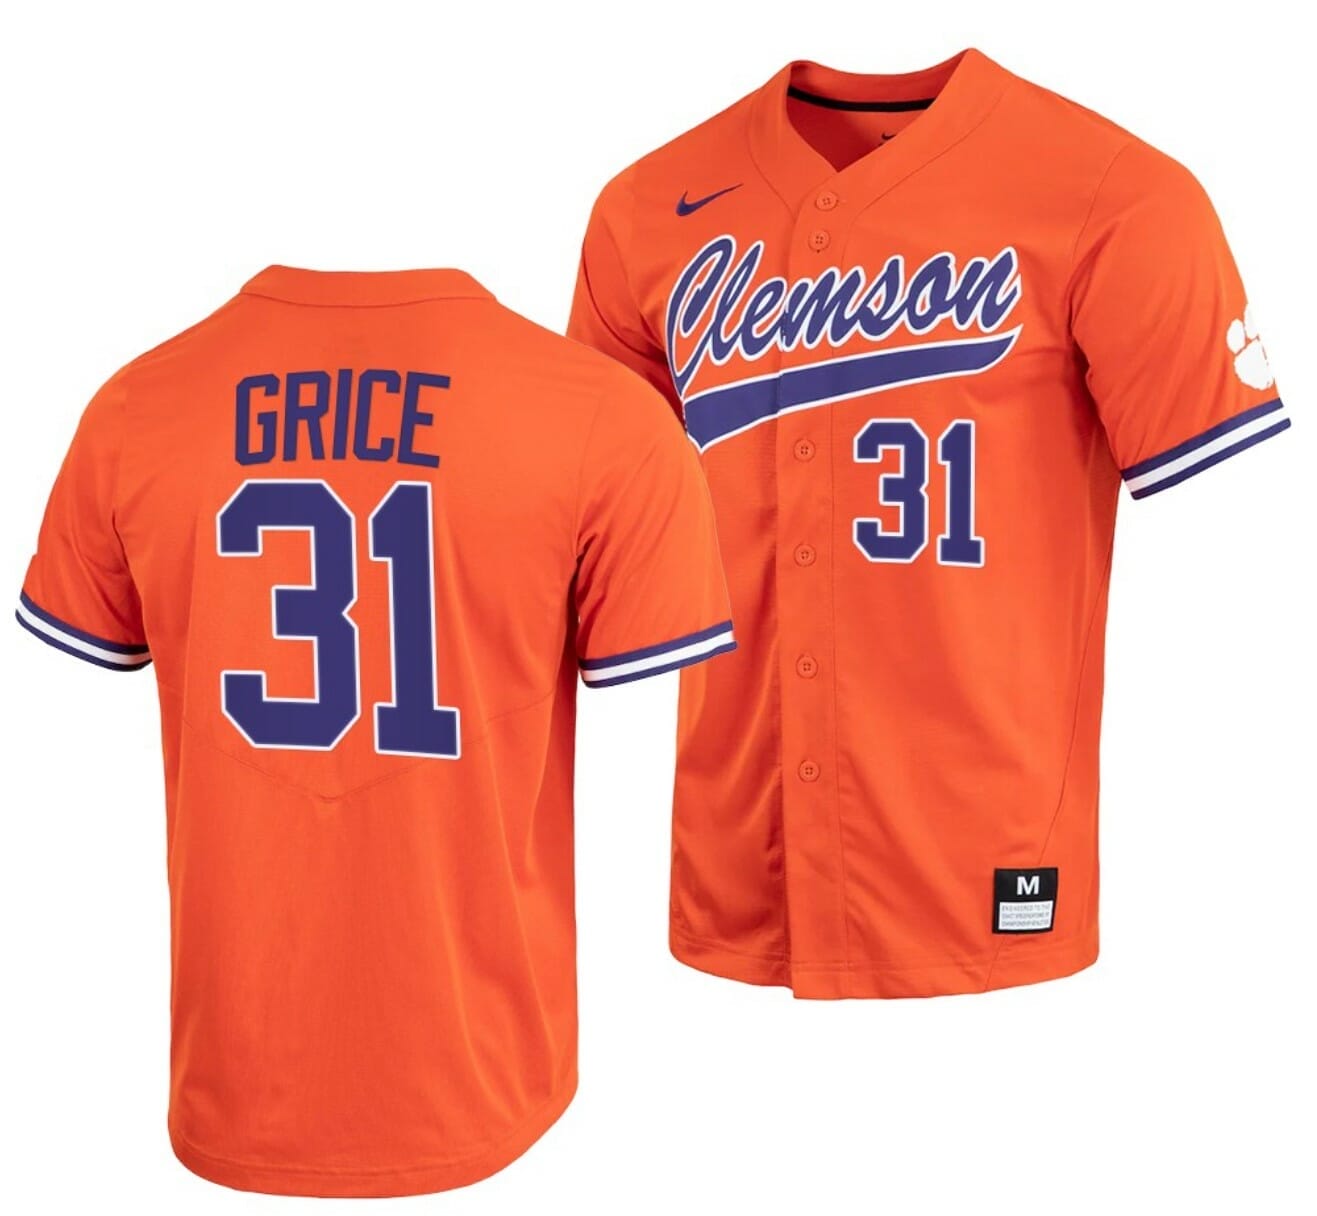 Available] Buy New Caden Grice Jersey Orange #31